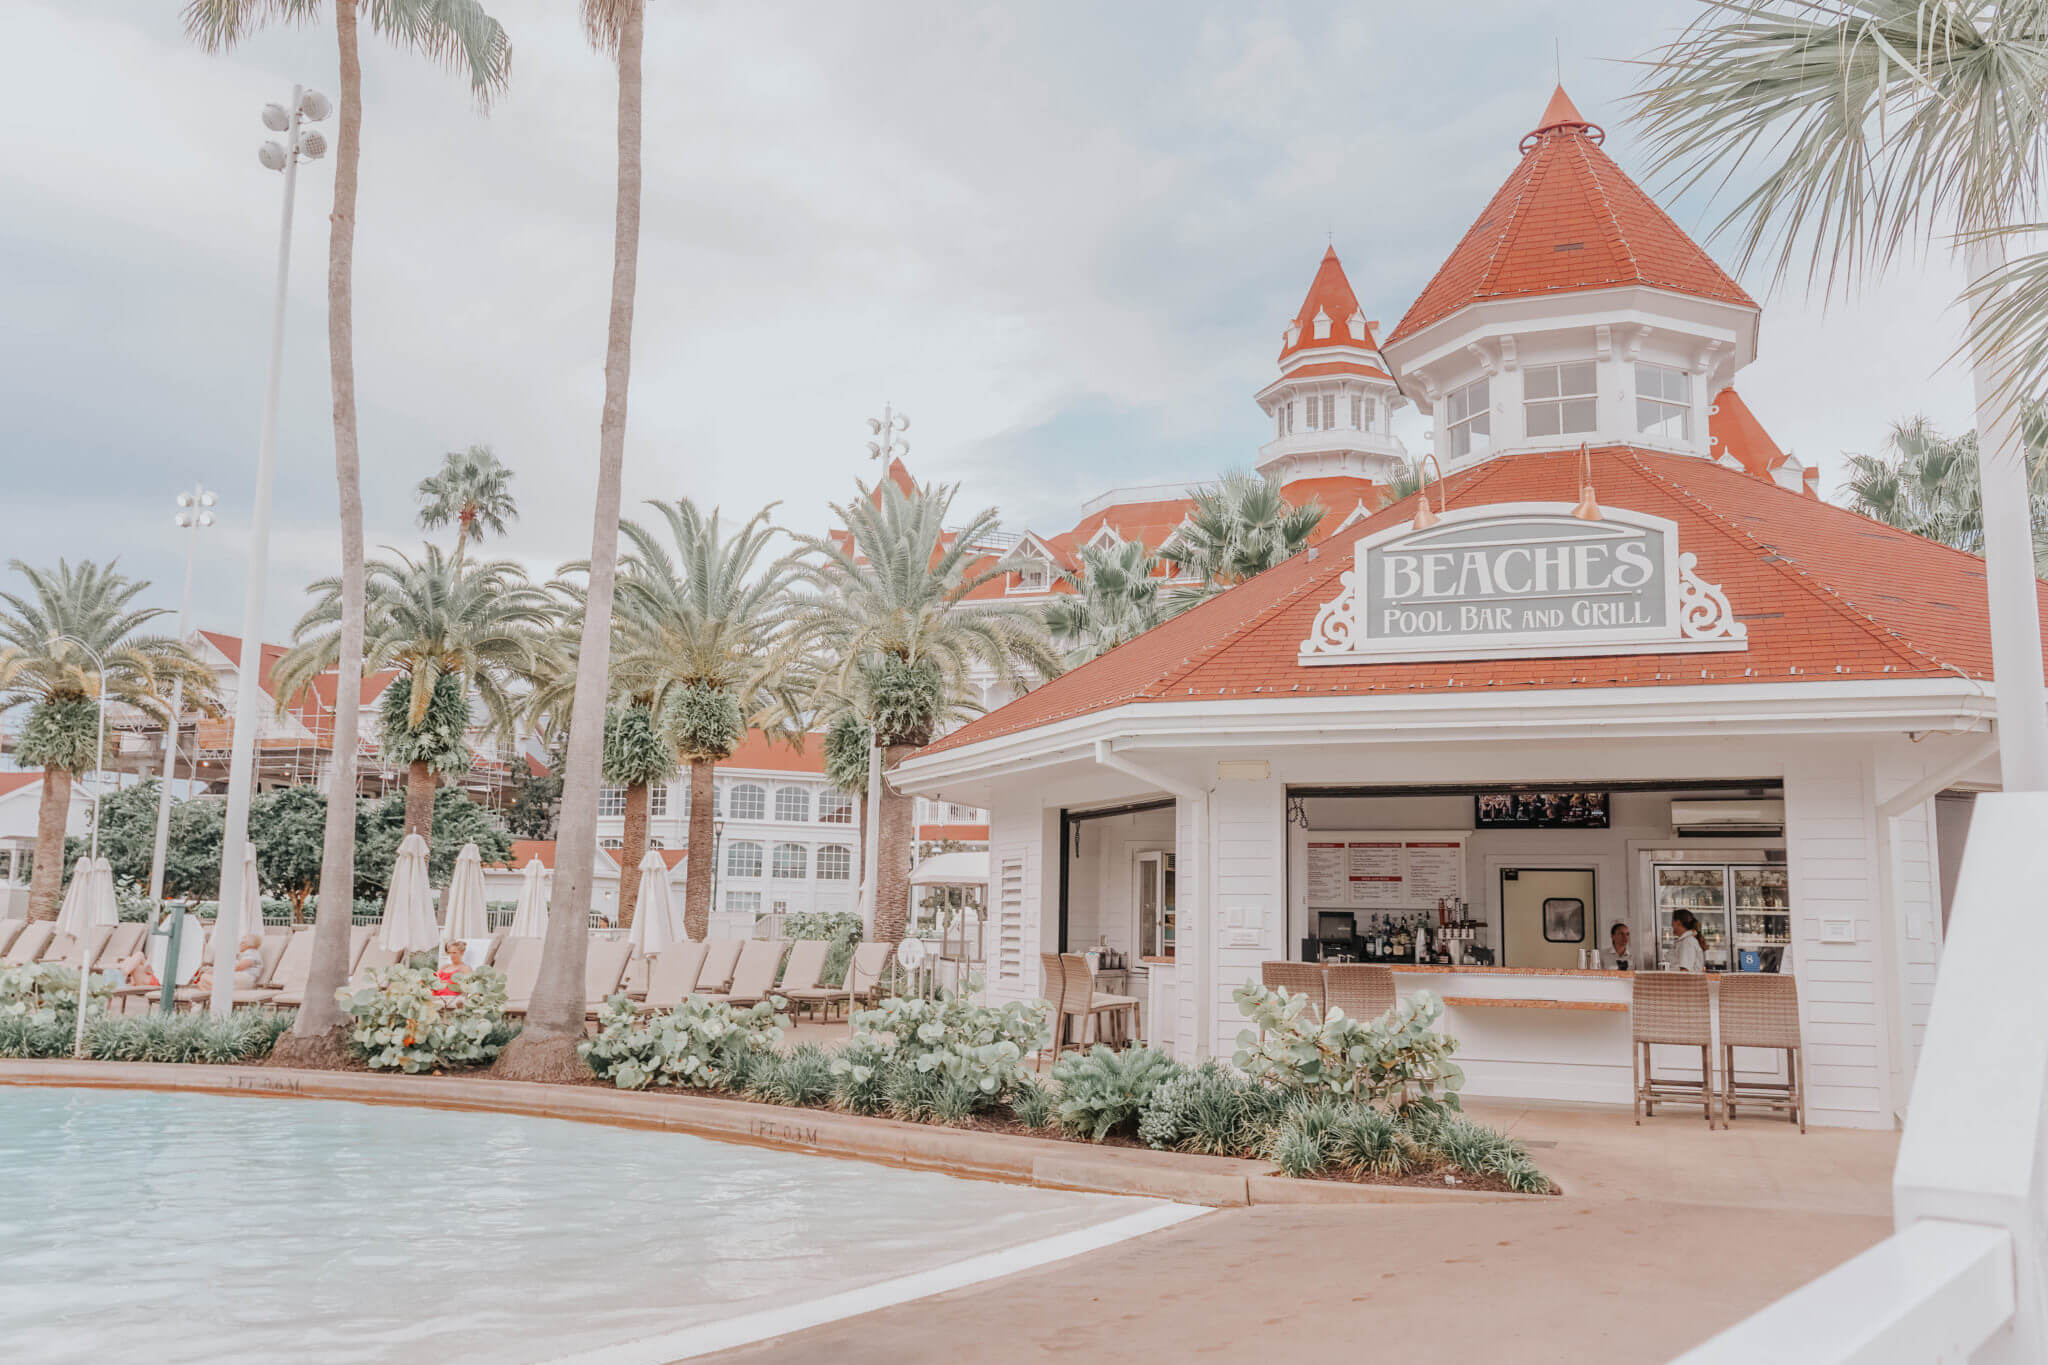 Disney World's Grand Floridian Courtyard pool with beaches pool bar and grill